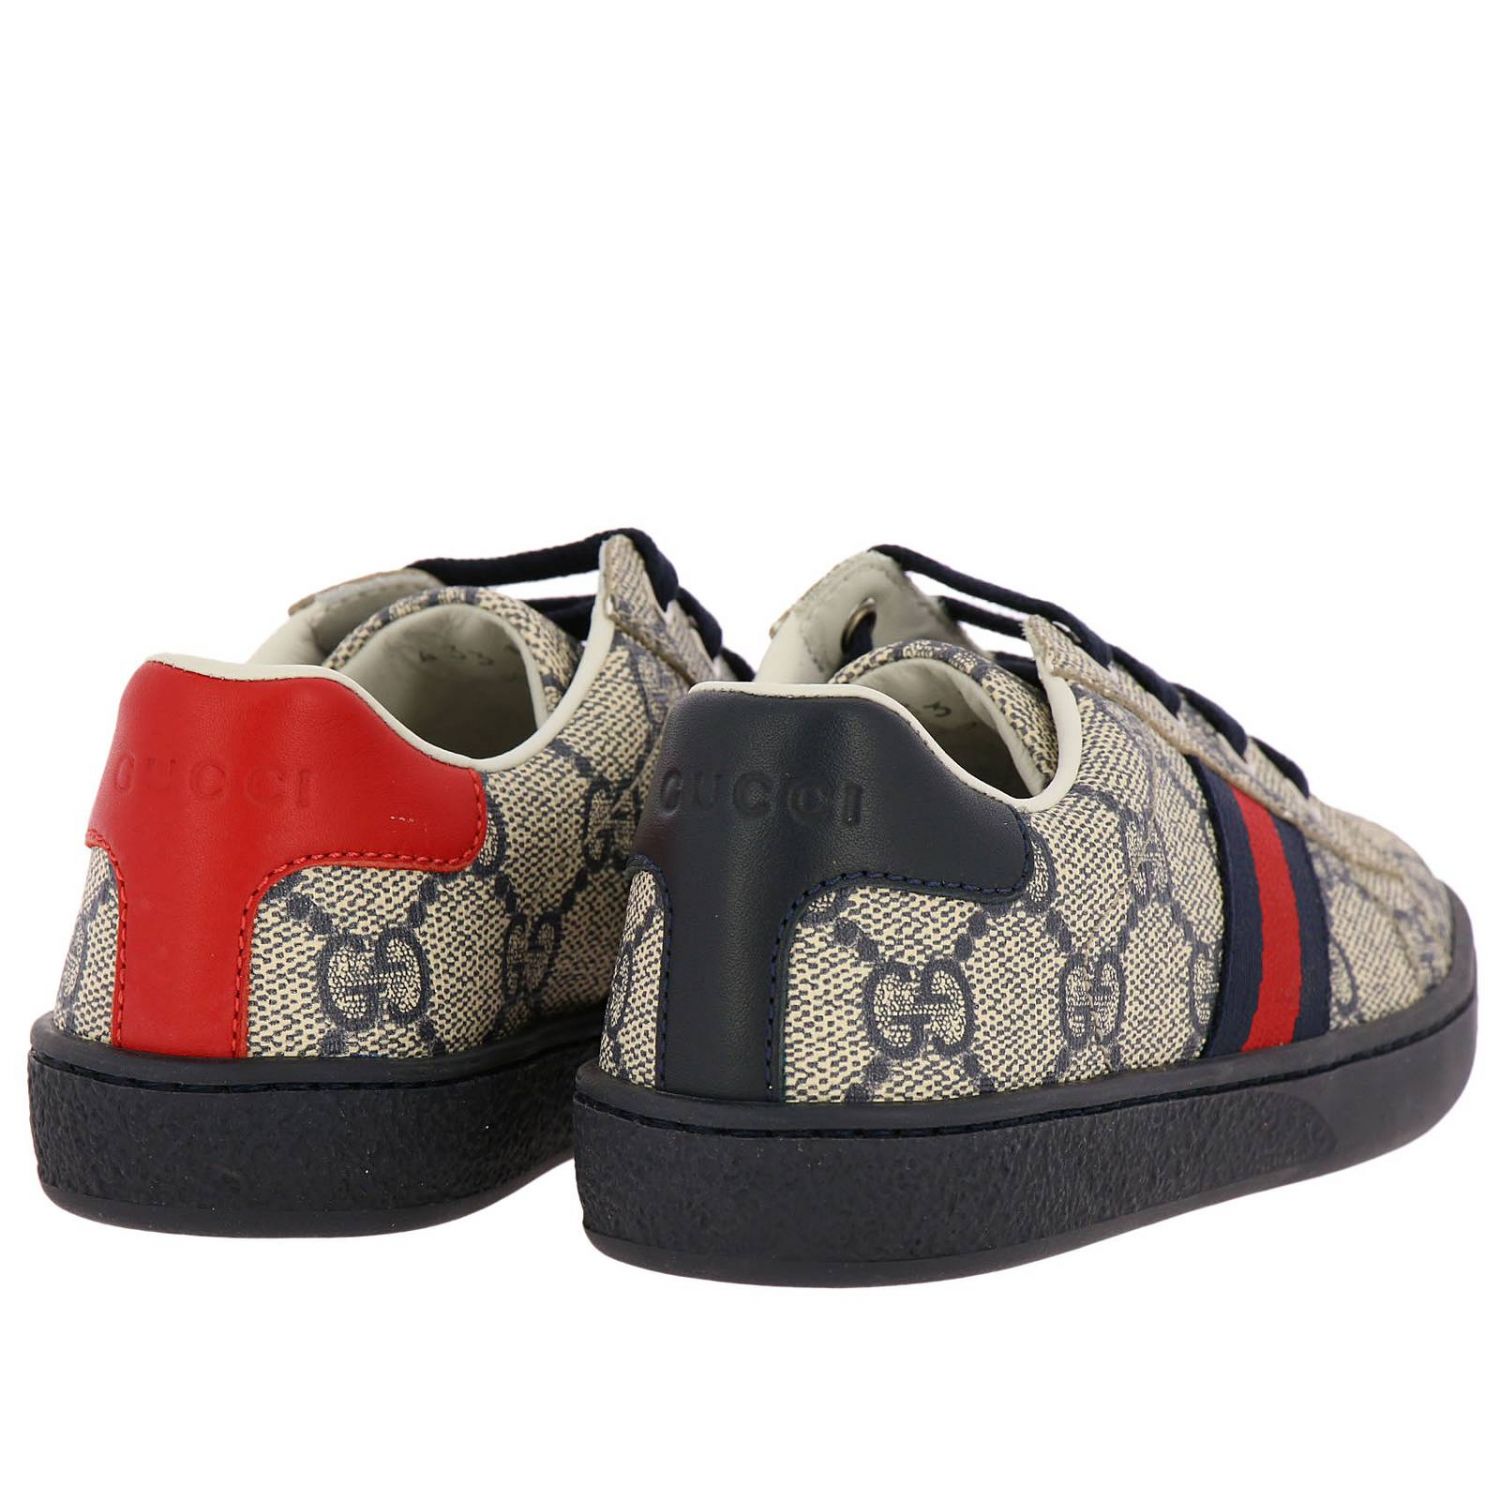 New Ace sneakers in leather with GG Supreme Gucci print and web bands ...